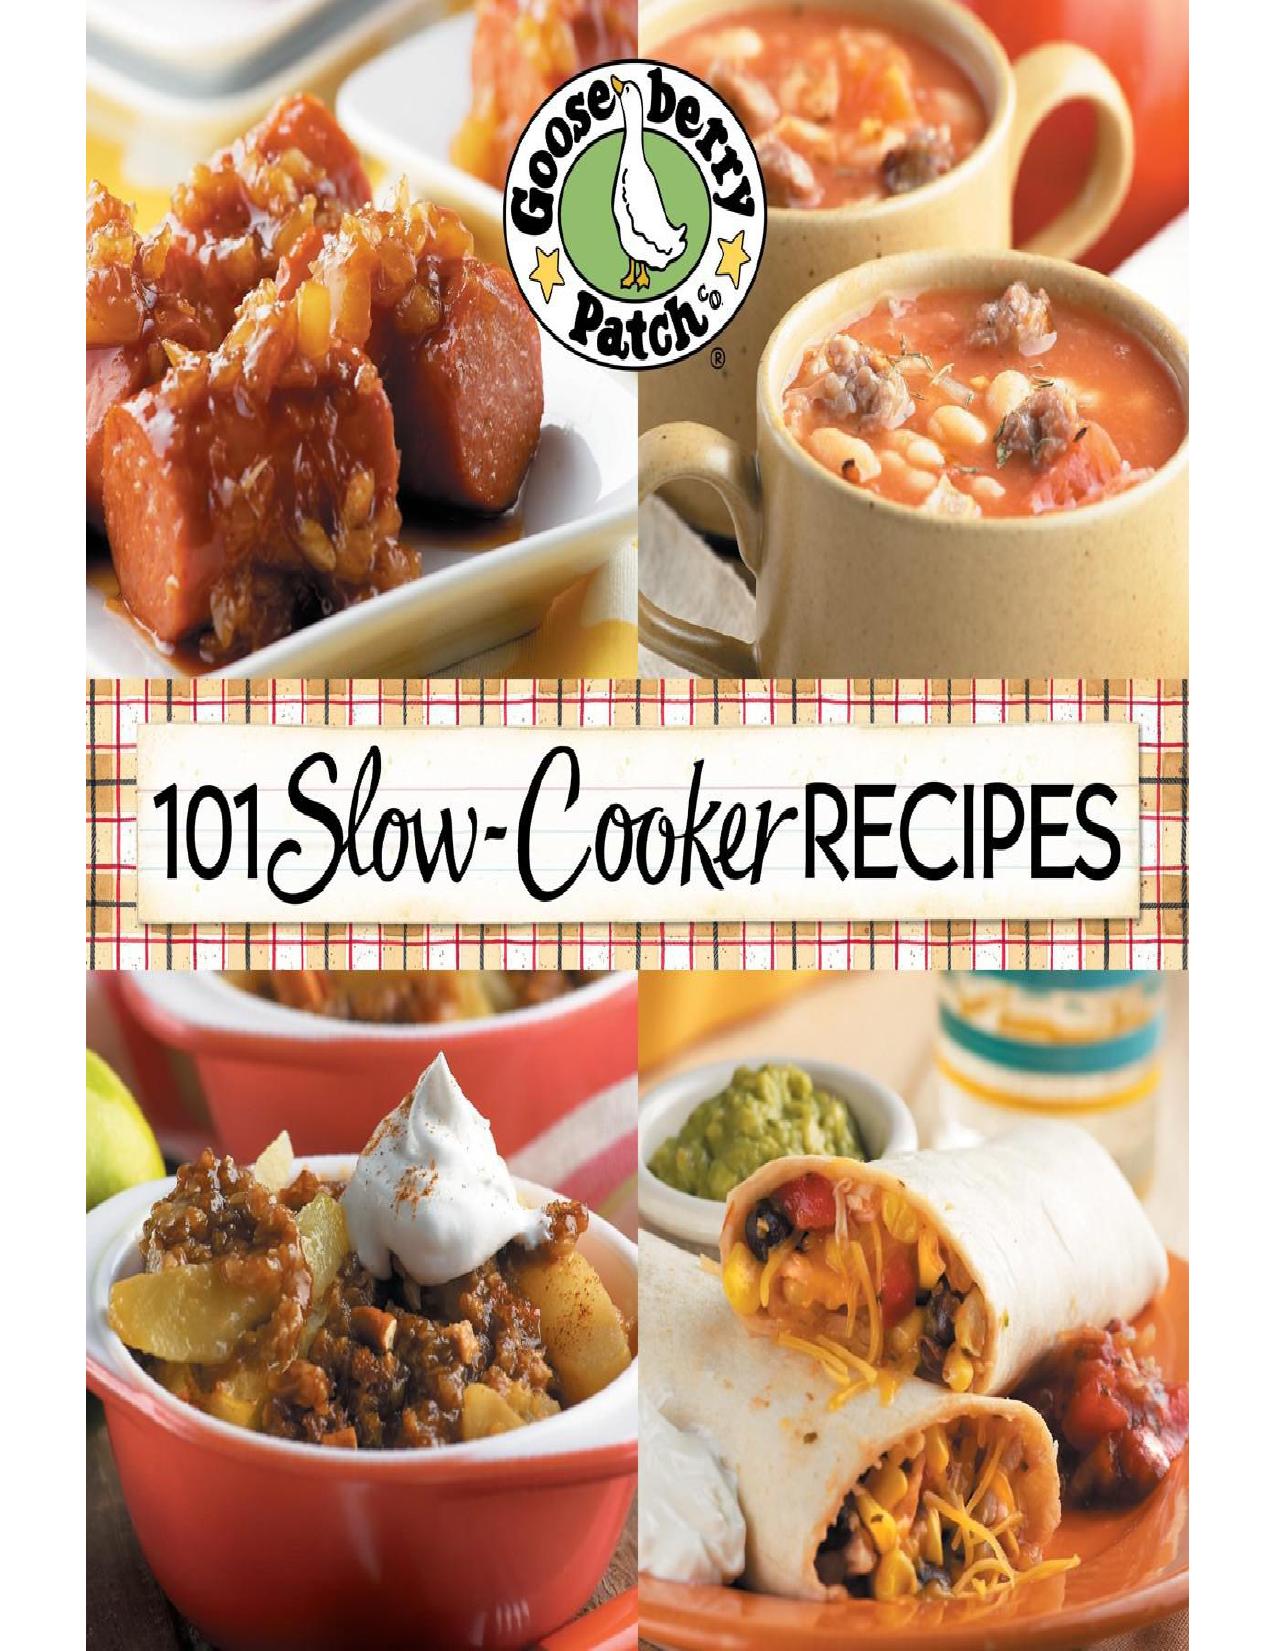 101 Slow-Cooker Recipes by Gooseberry Patch